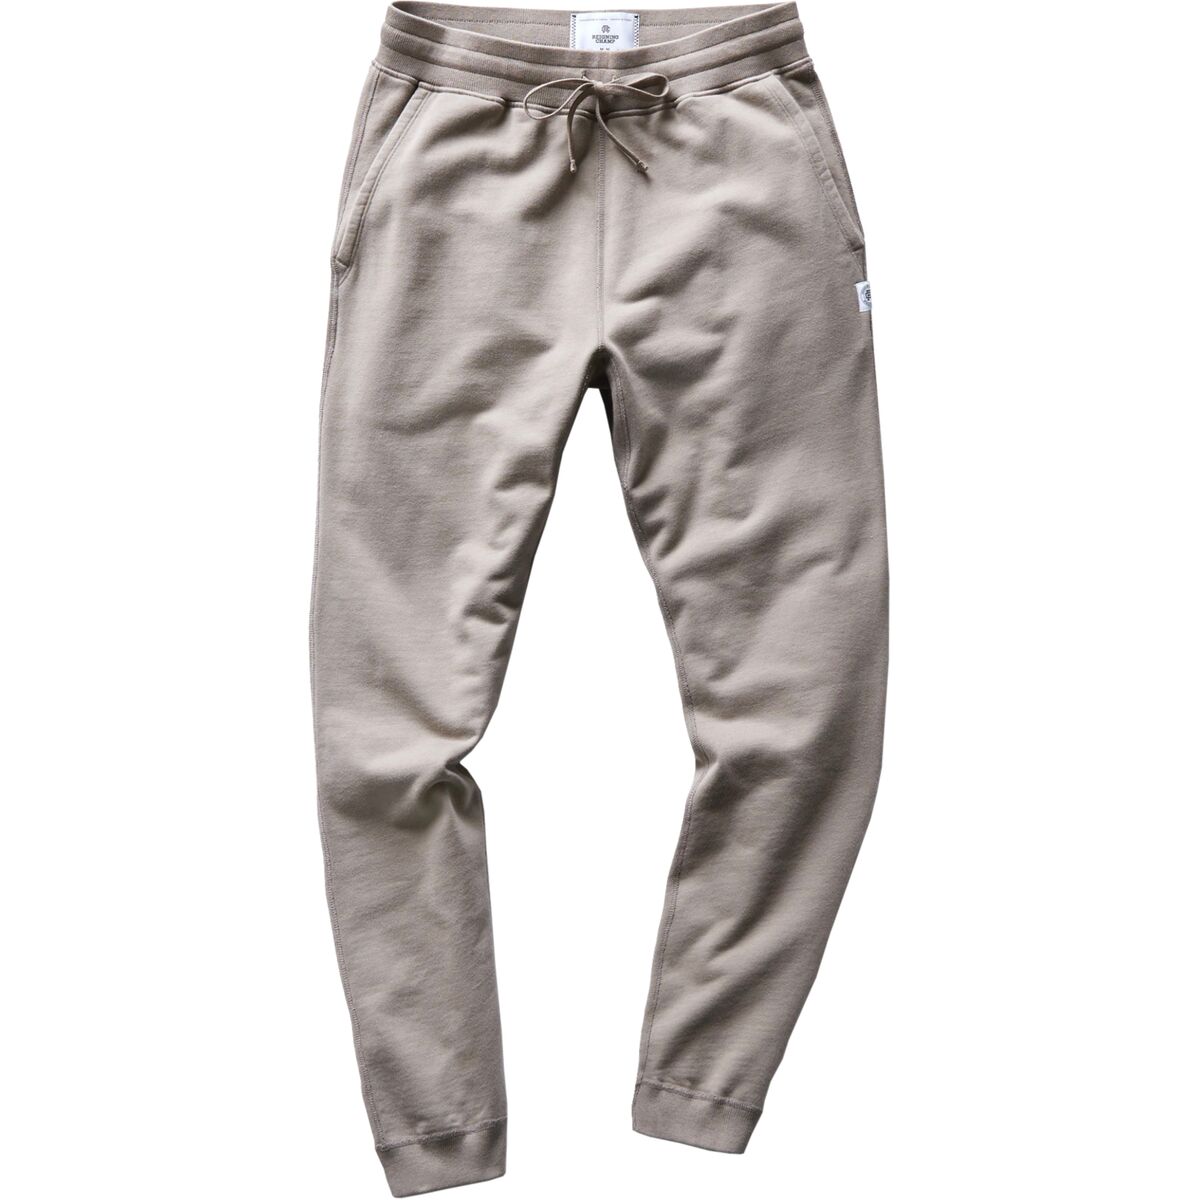 Reigning Champ Midweight Slim Sweatpant - Men's | Backcountry.com